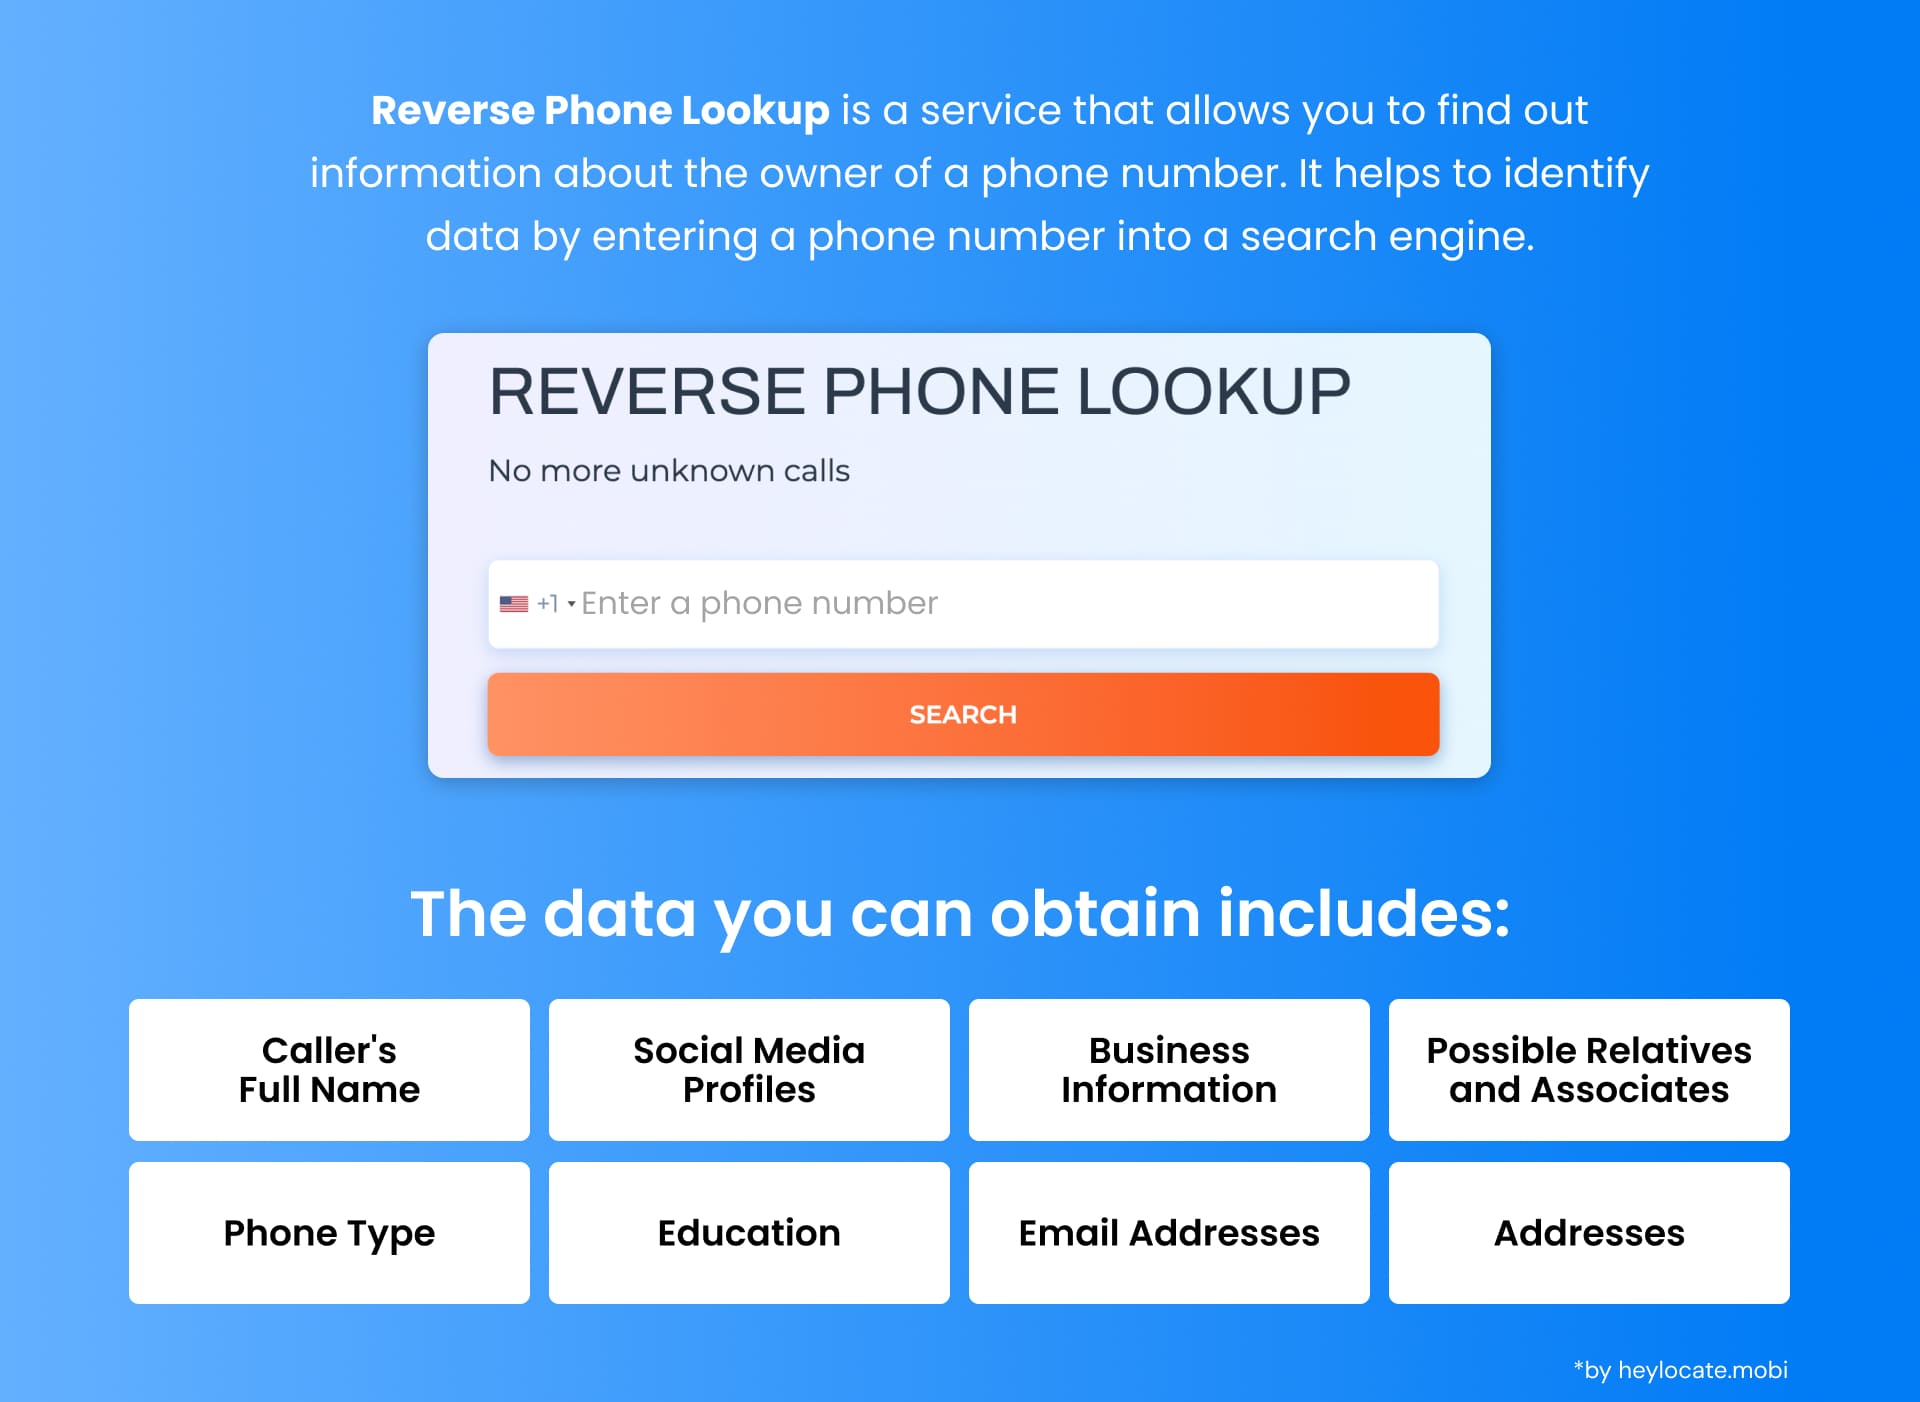 This infographic illustrates the reverse phone lookup service, which decodes the mystery of unknown calls by providing detailed information about the phone number's owner when input into a search engine.